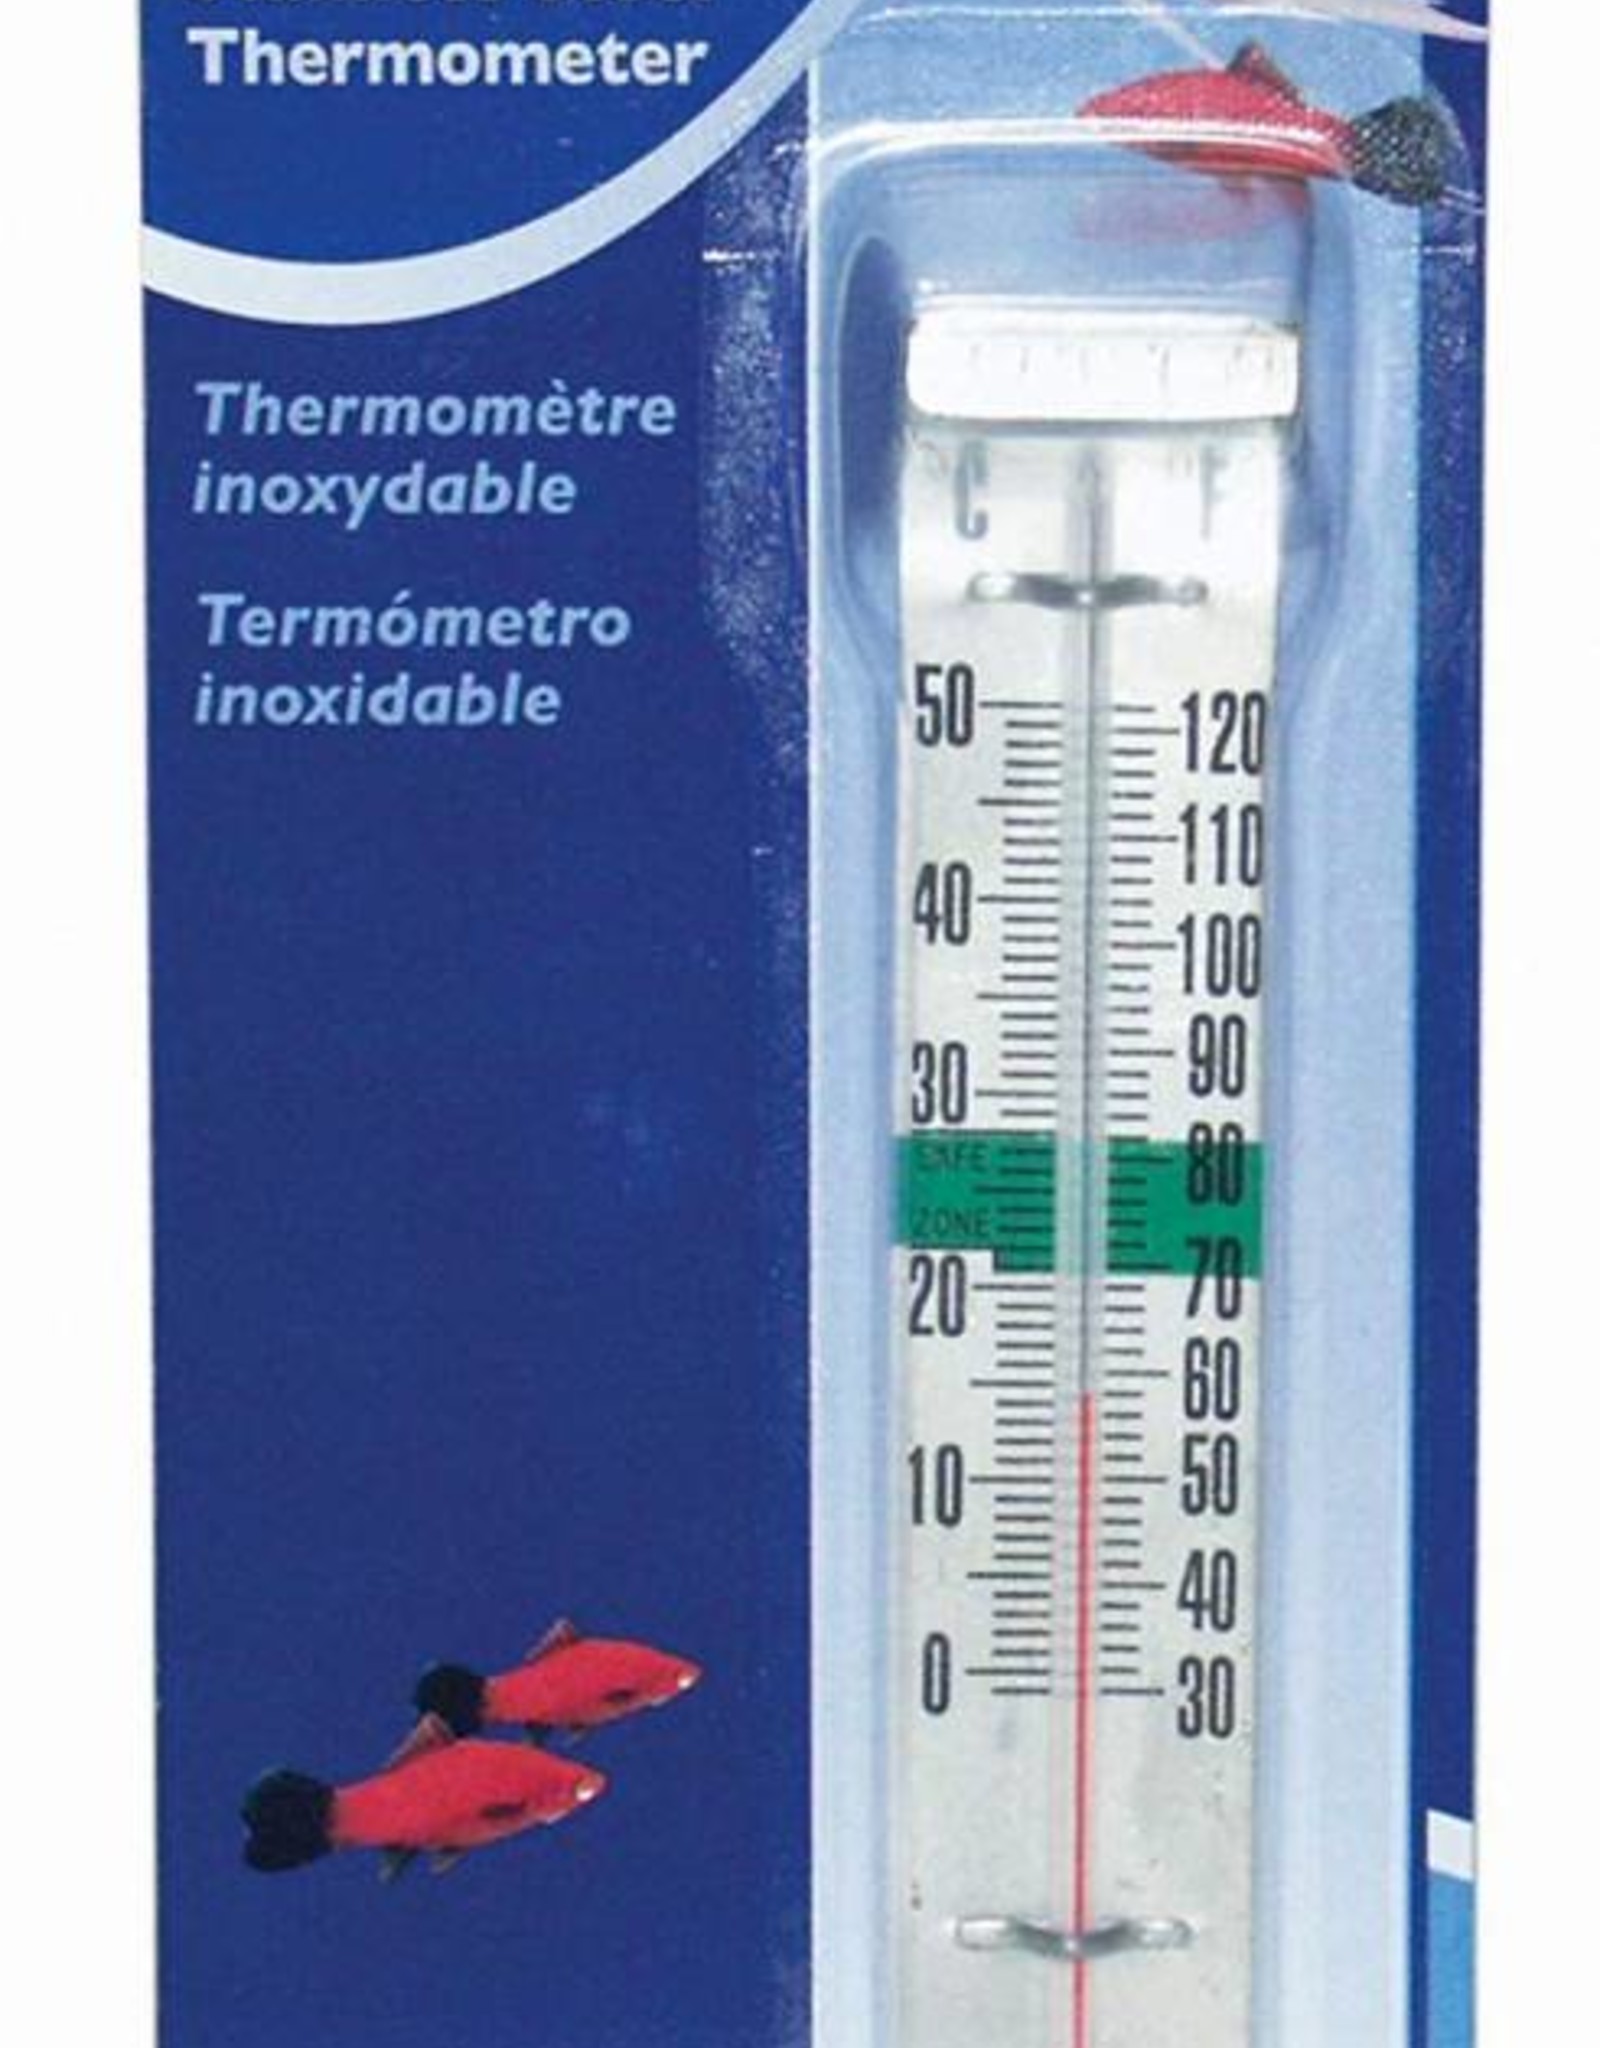 Penn-Plax STAINLESS STEEL THERMOMETER